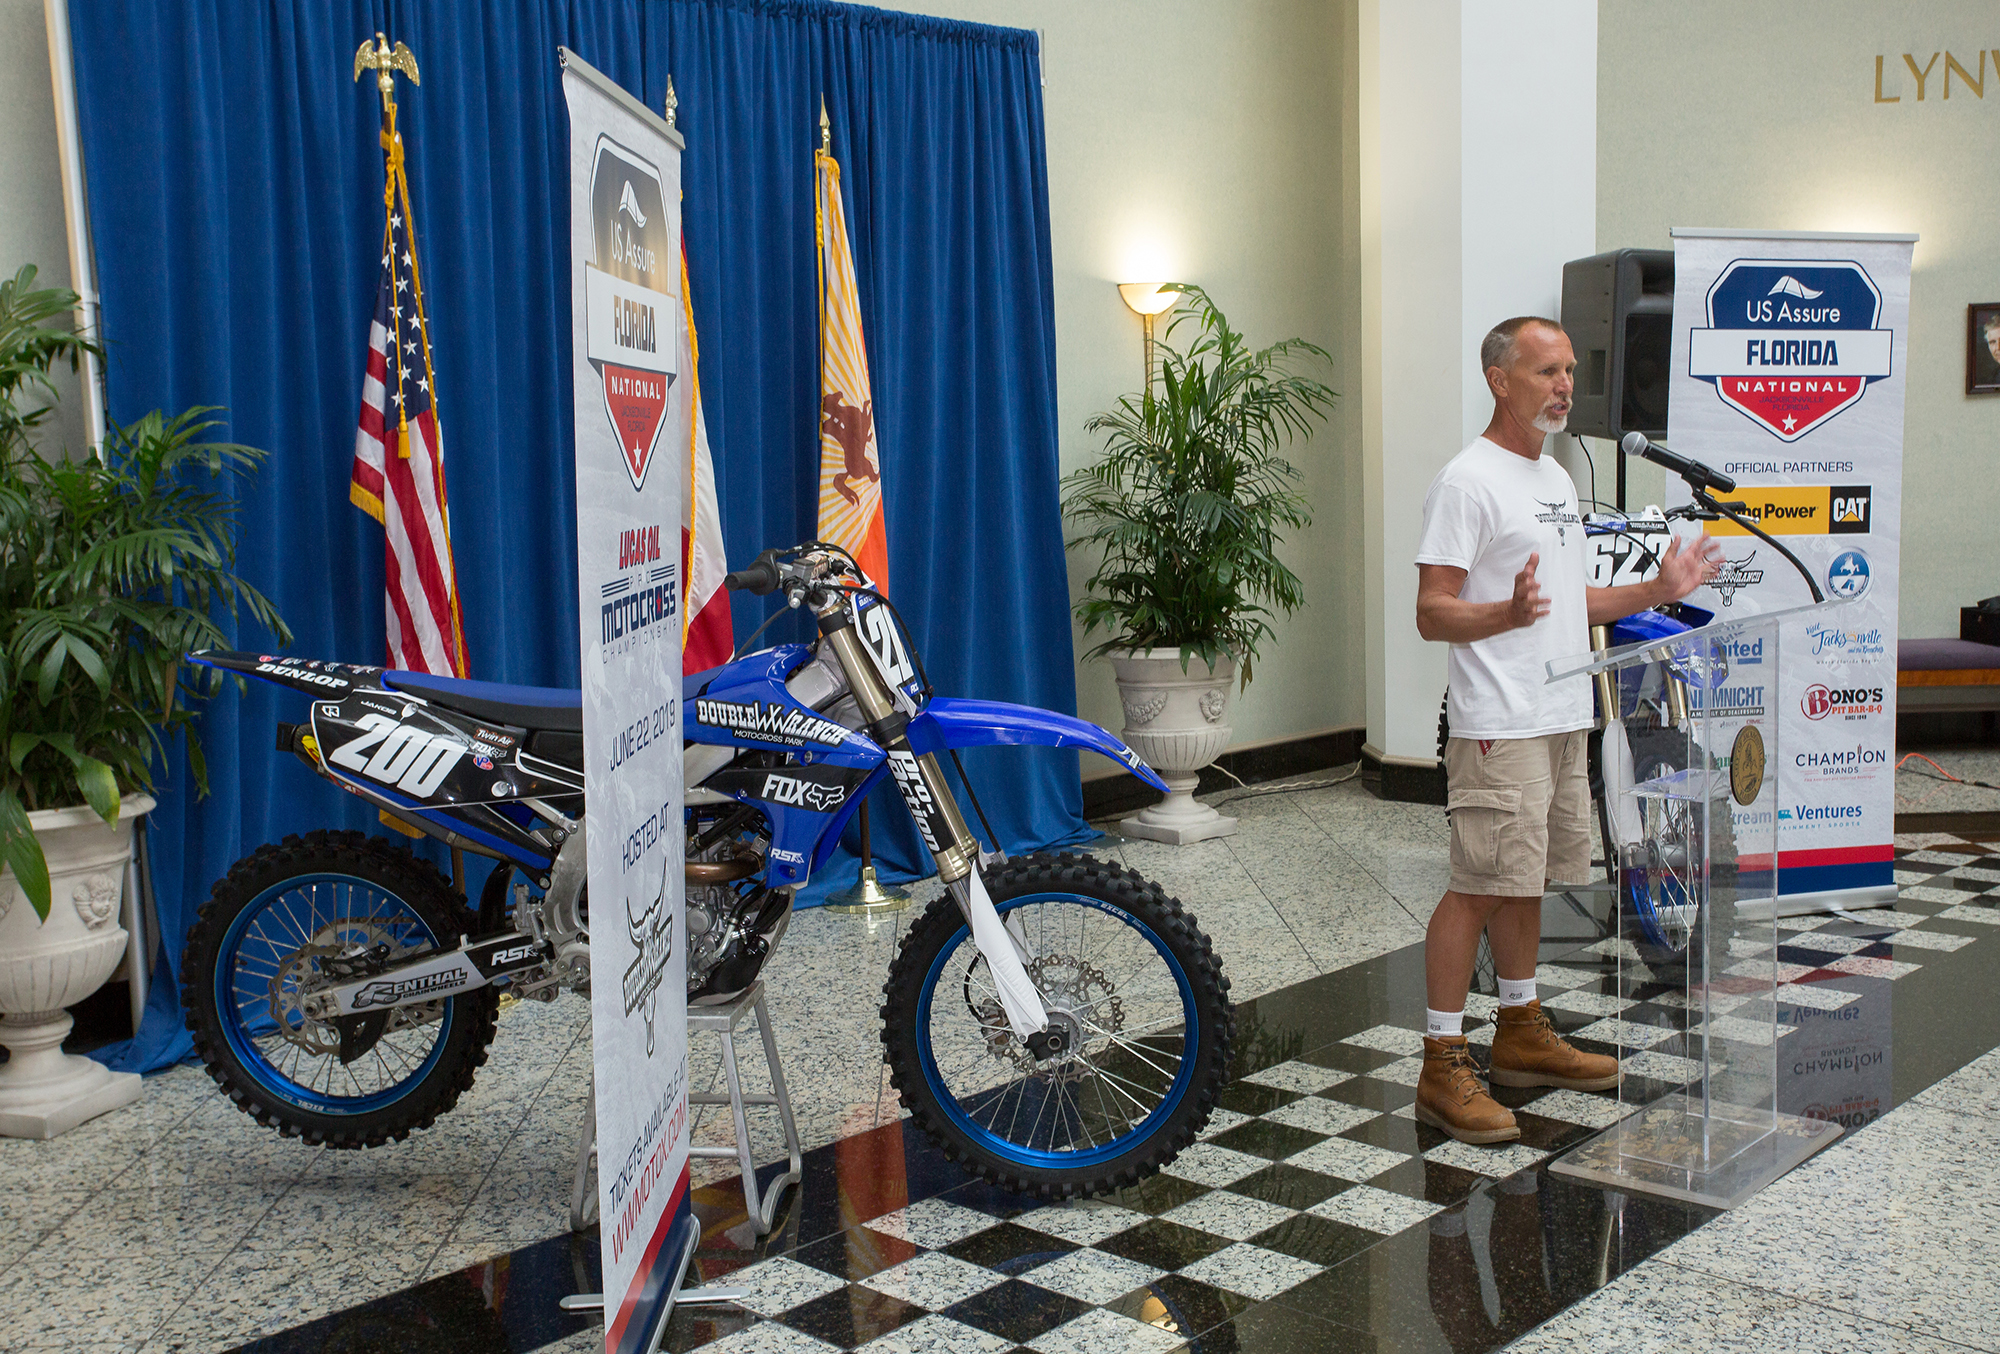 Scarborough attended the news conference last week when the city announced that MX Sports Pro Racing and NBC Sports selected WW Ranch Motocross Park to host the inaugural US Assure Florida National Presented by Ring Power.